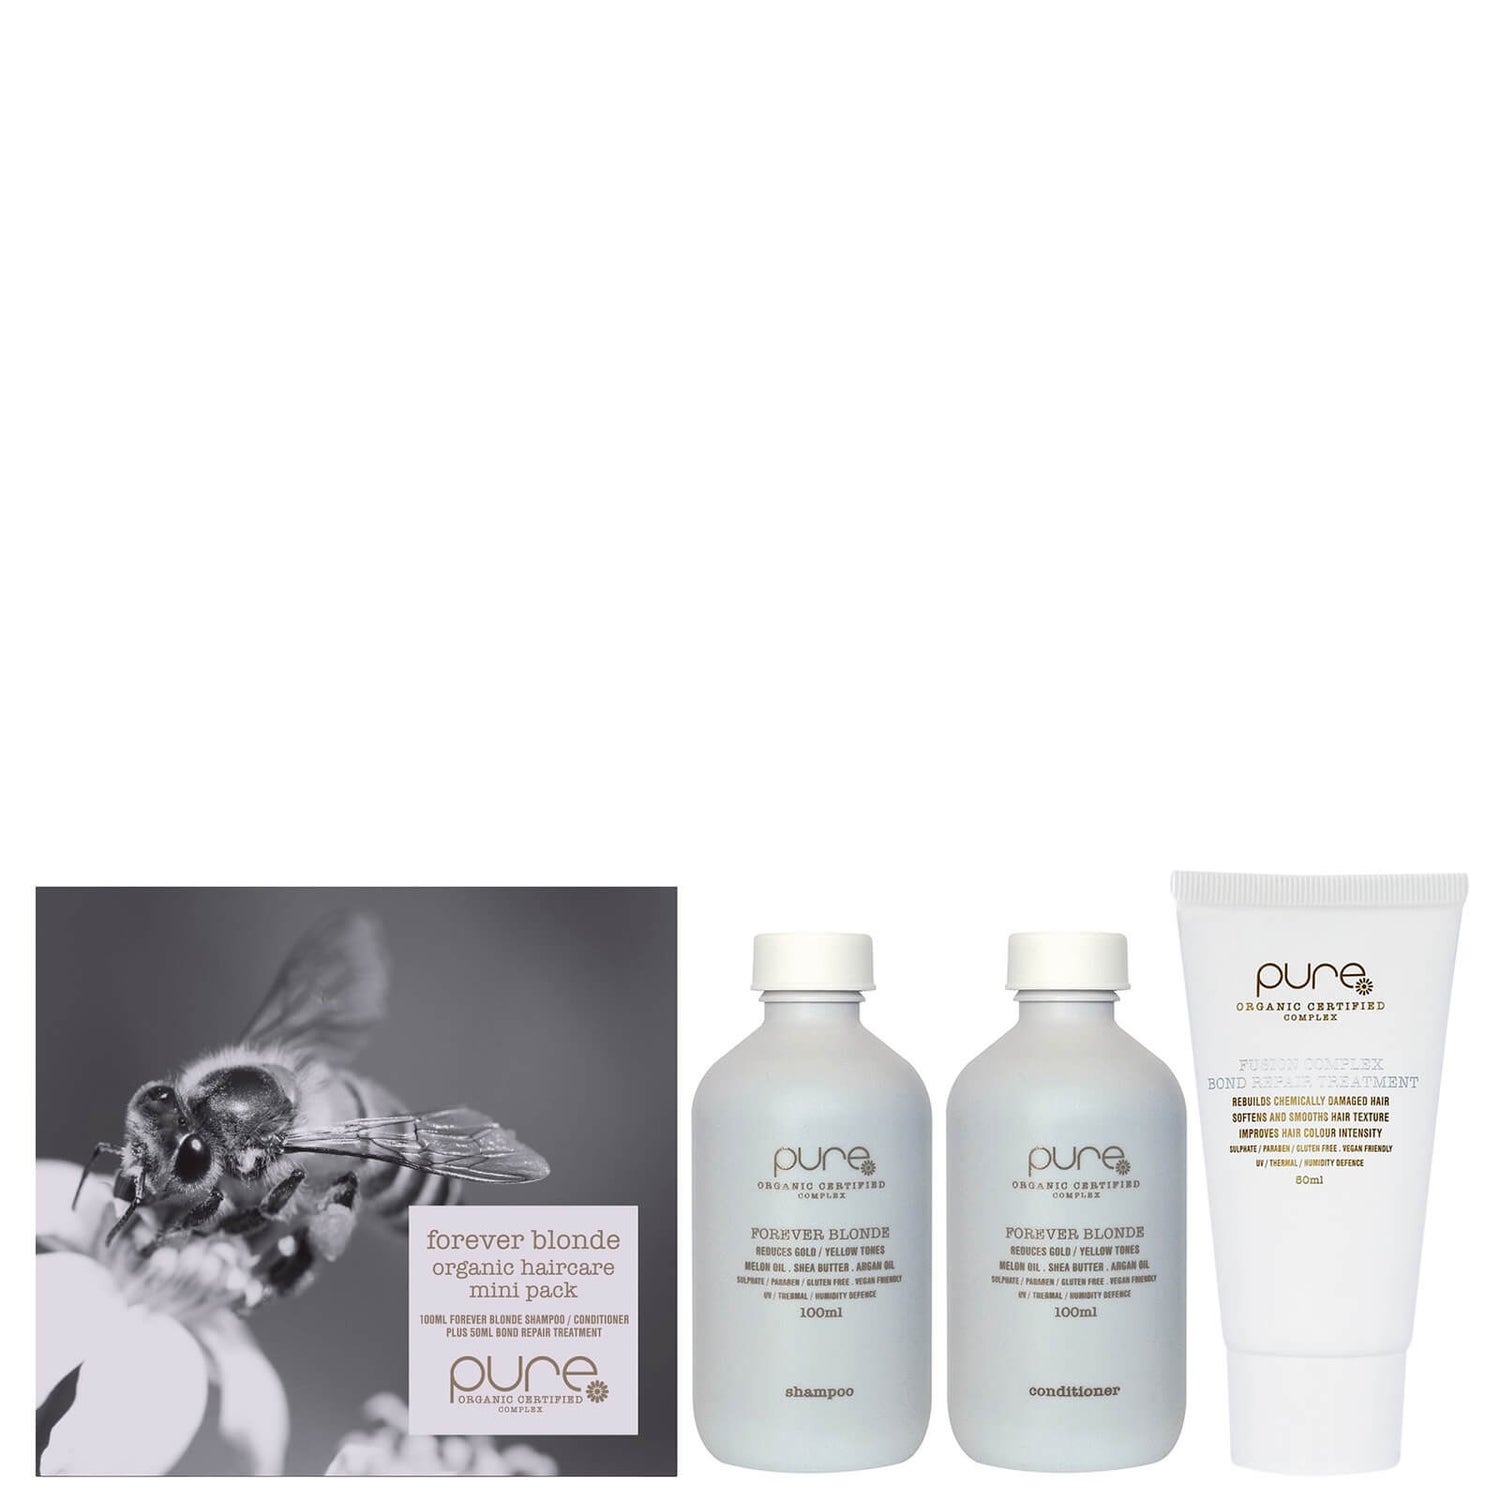 Pure Forever Blonde Organic Haircare Mini Trio Pack